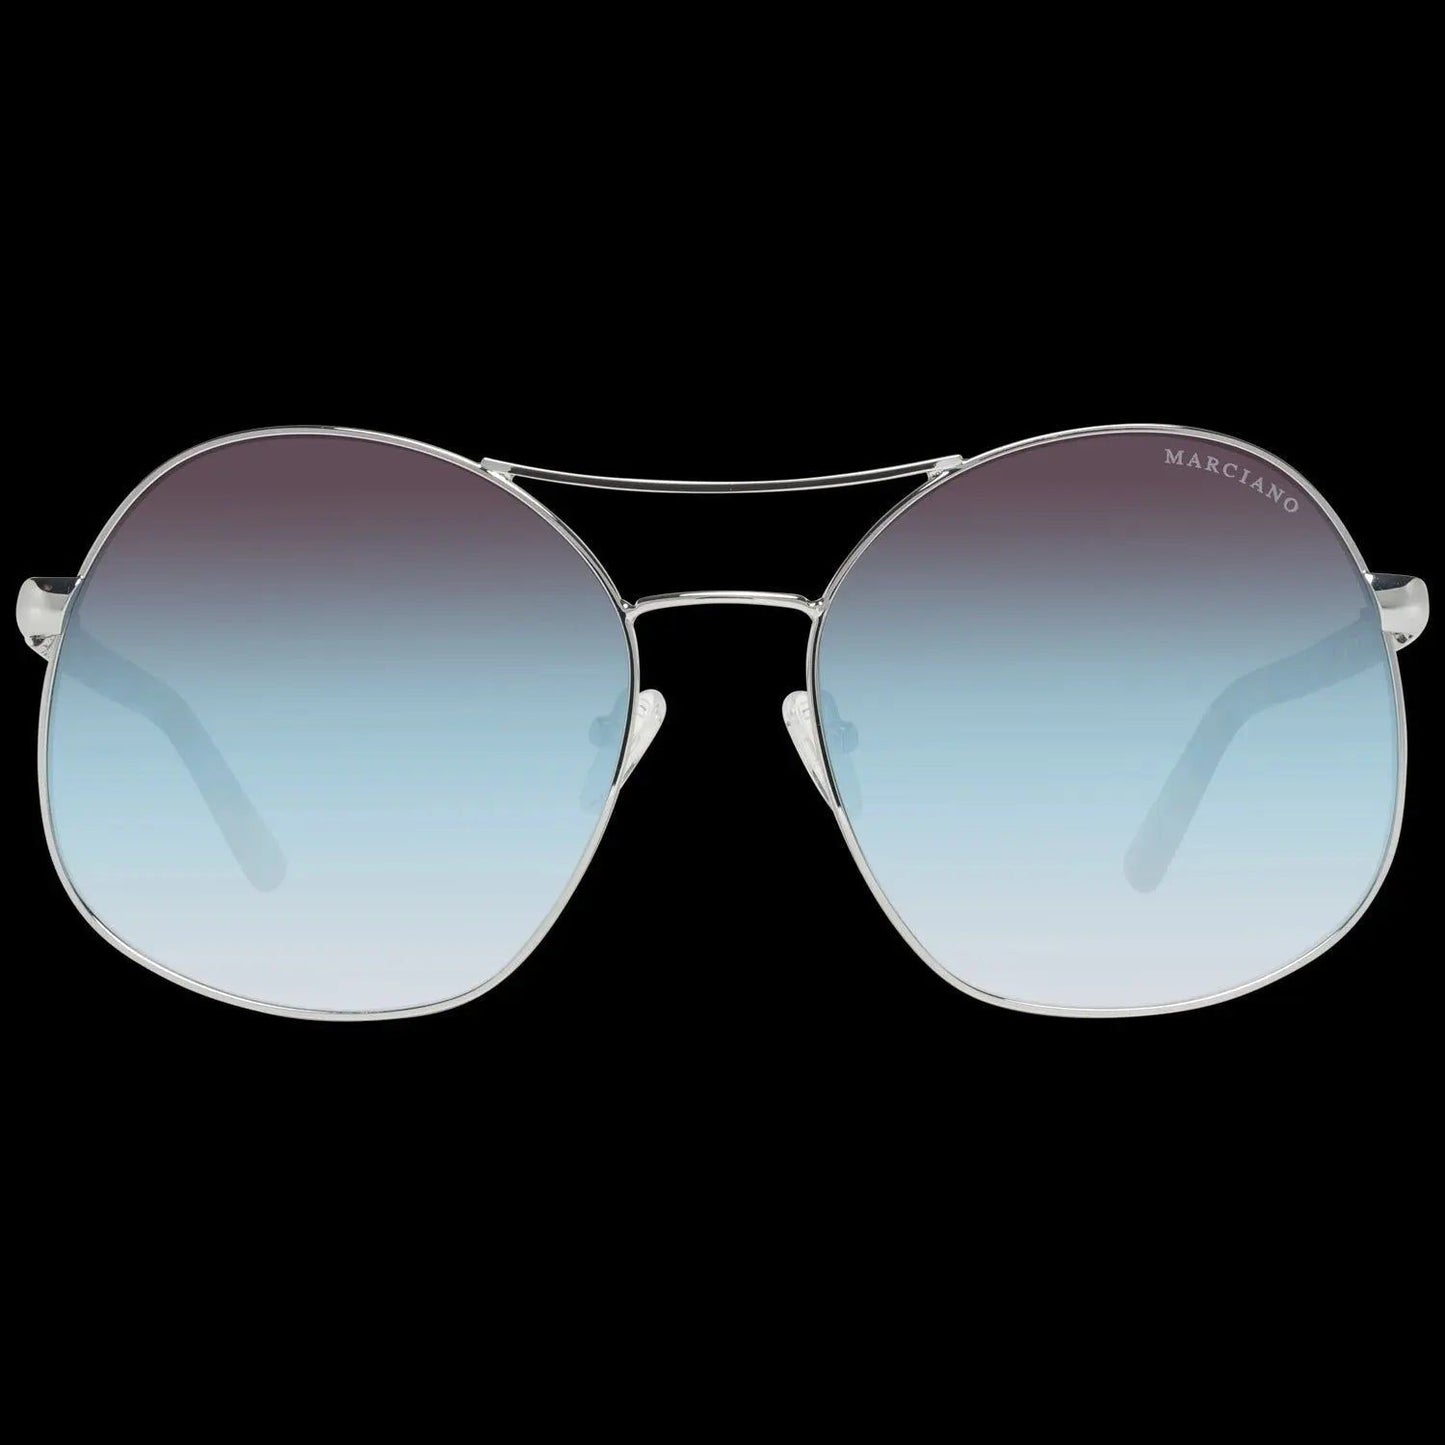 MARCIANO By GUESS SUNGLASSES MARCIANO BY GUESS MOD. GM0807 6210W SUNGLASSES & EYEWEAR marciano-by-guess-mod-gm0807-6210w